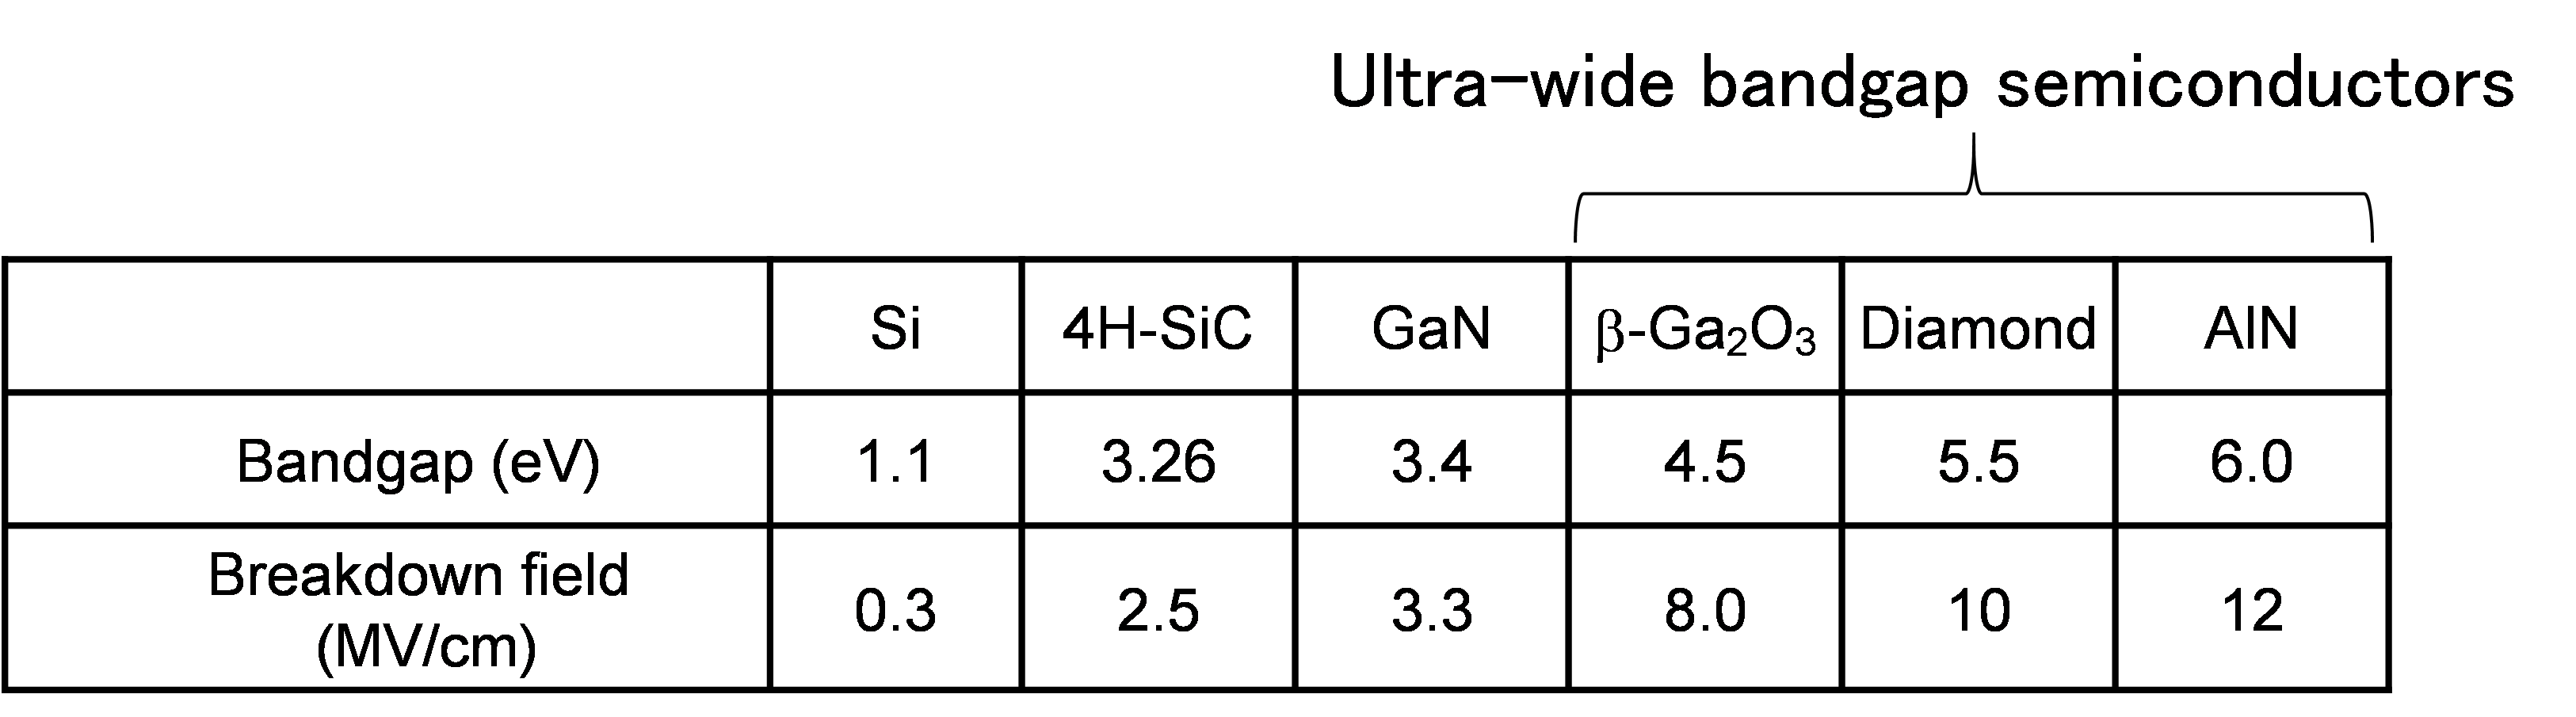 Table I. Bandgap energy and breakdown field of semiconductor materials.